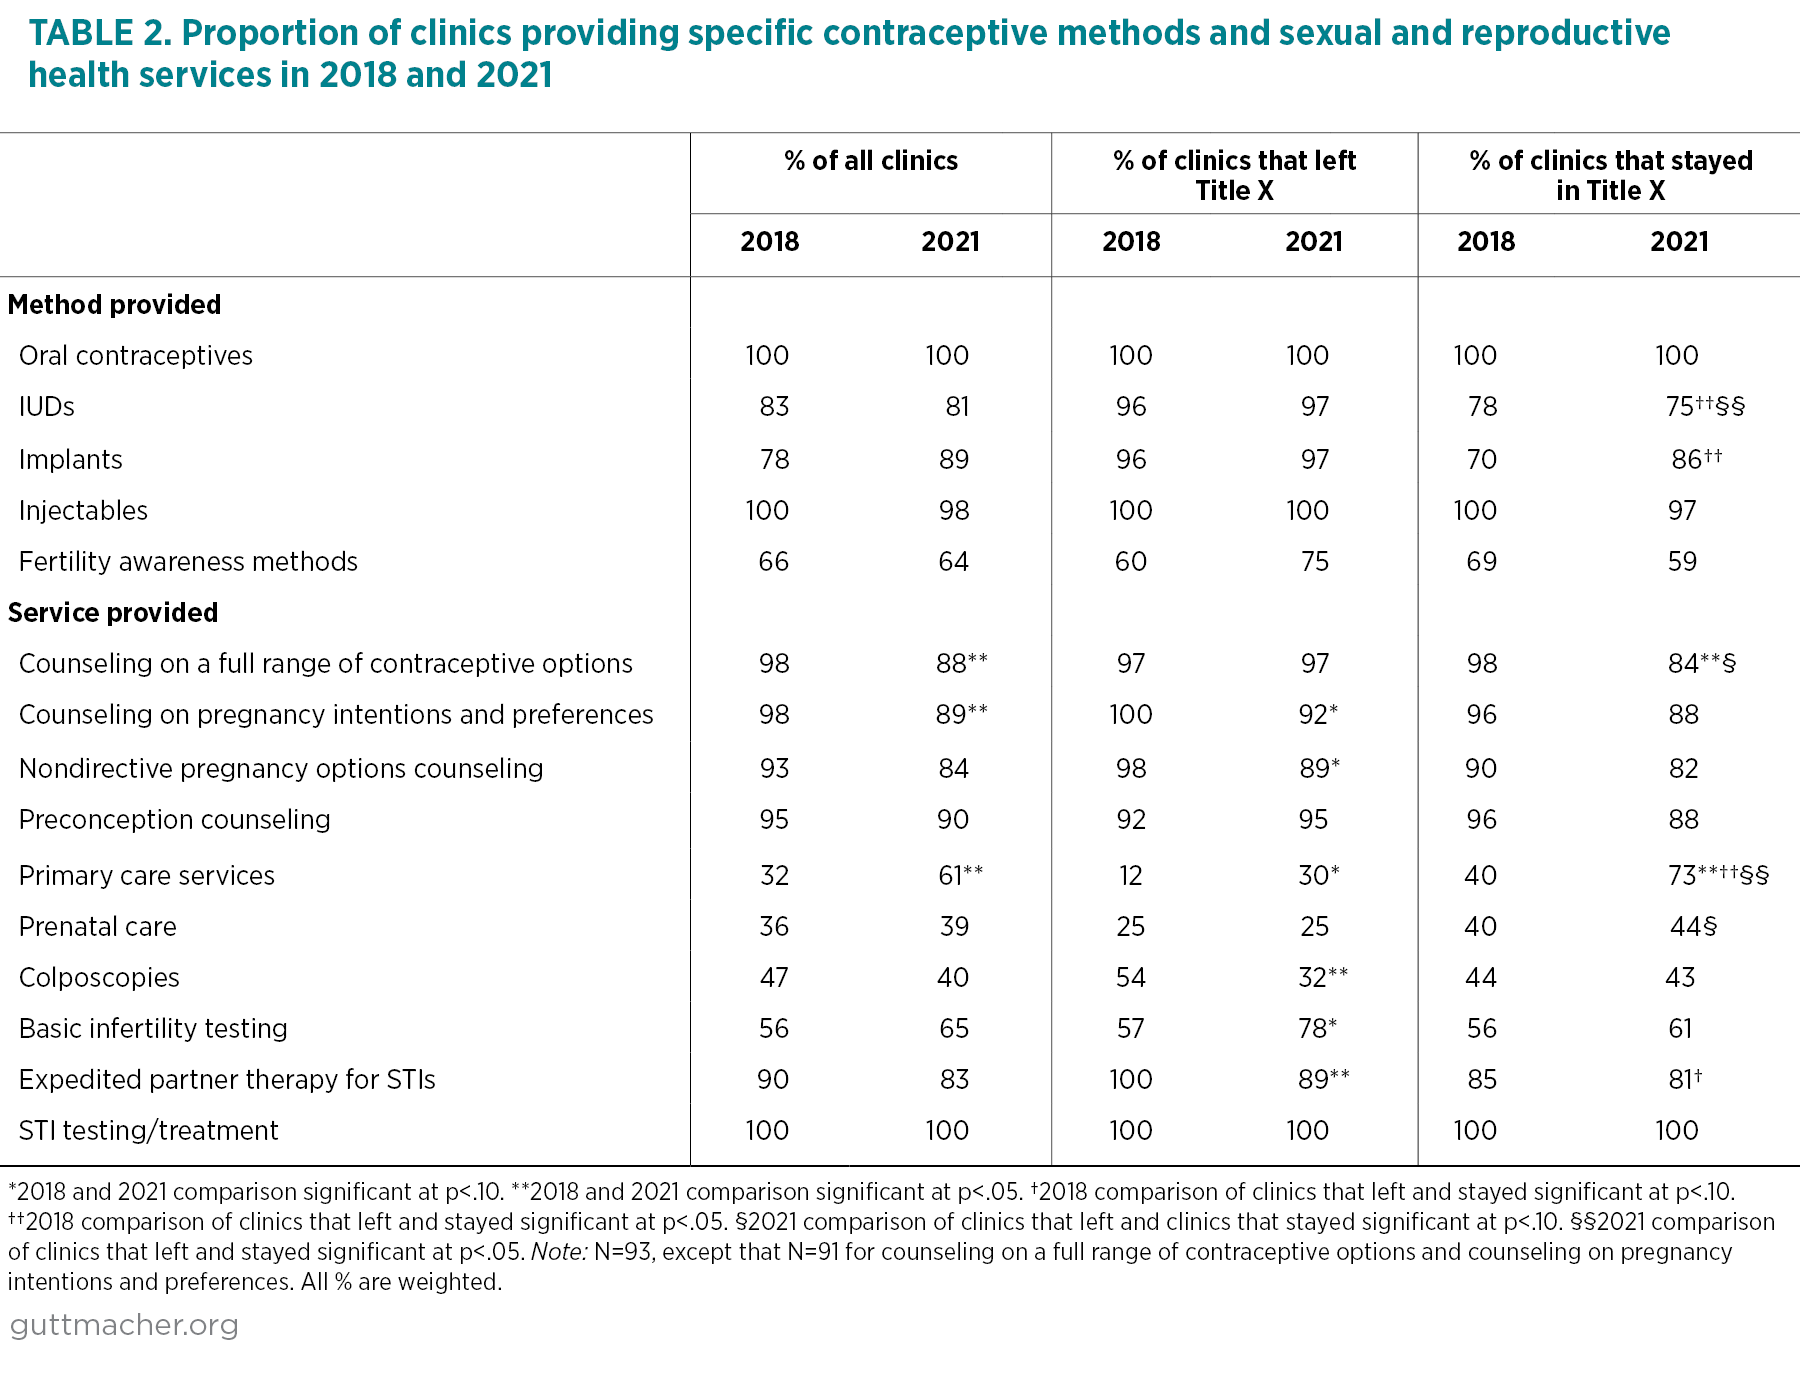 Table showing Proportion of clinics providing specific contraceptive methods and sexual and reproductive health services in 2018 and 2021